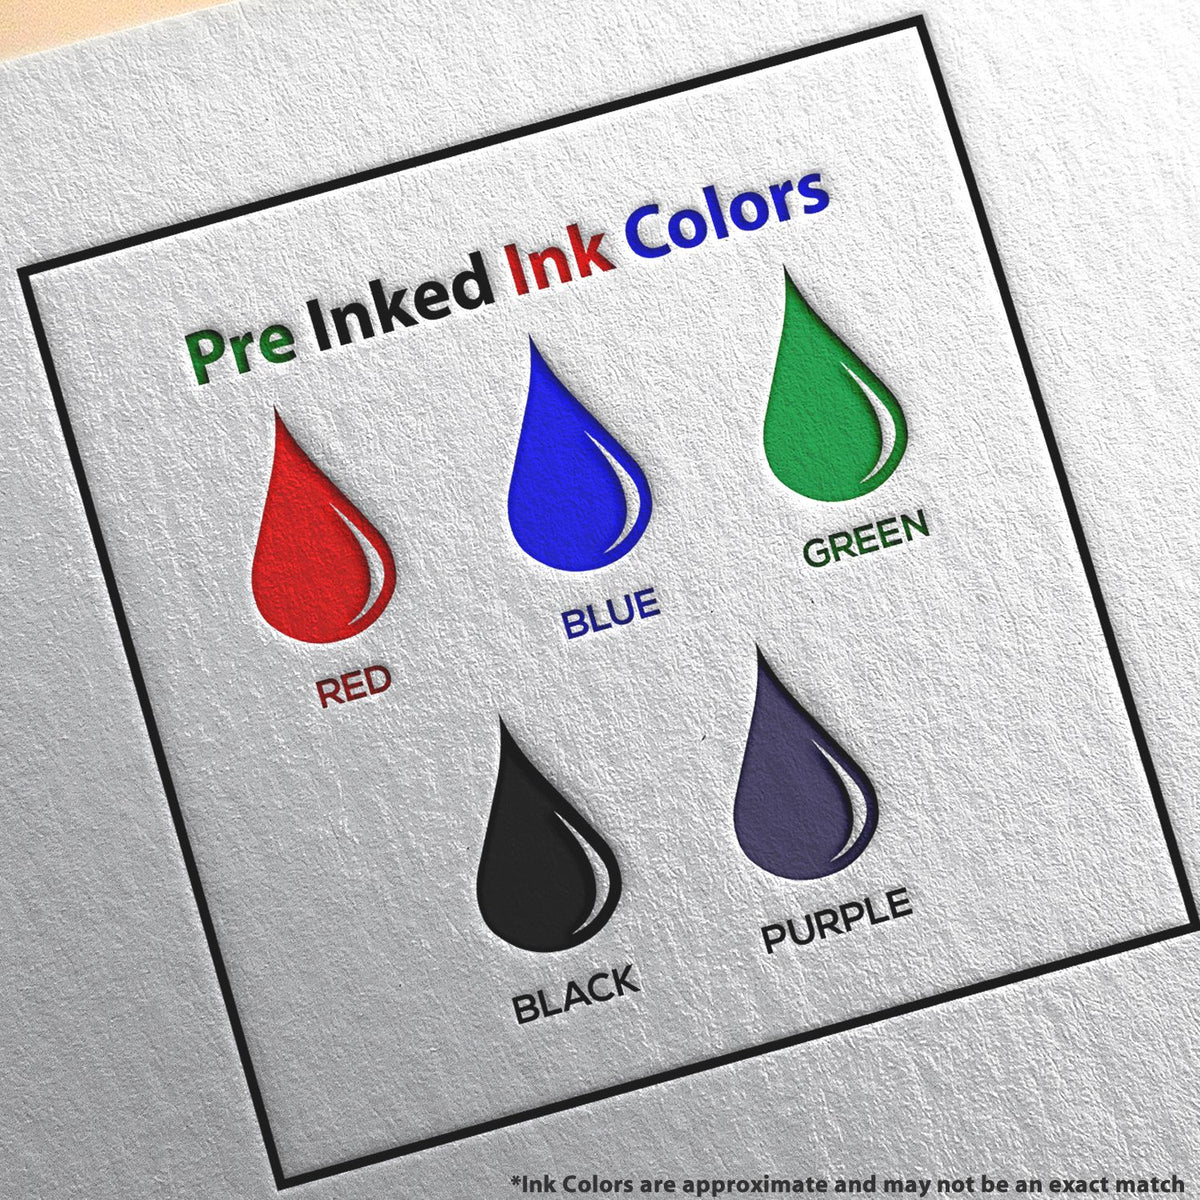 A picture showing the different ink colors or hues available for the Slim Pre-Inked Missouri Land Surveyor Seal Stamp product.